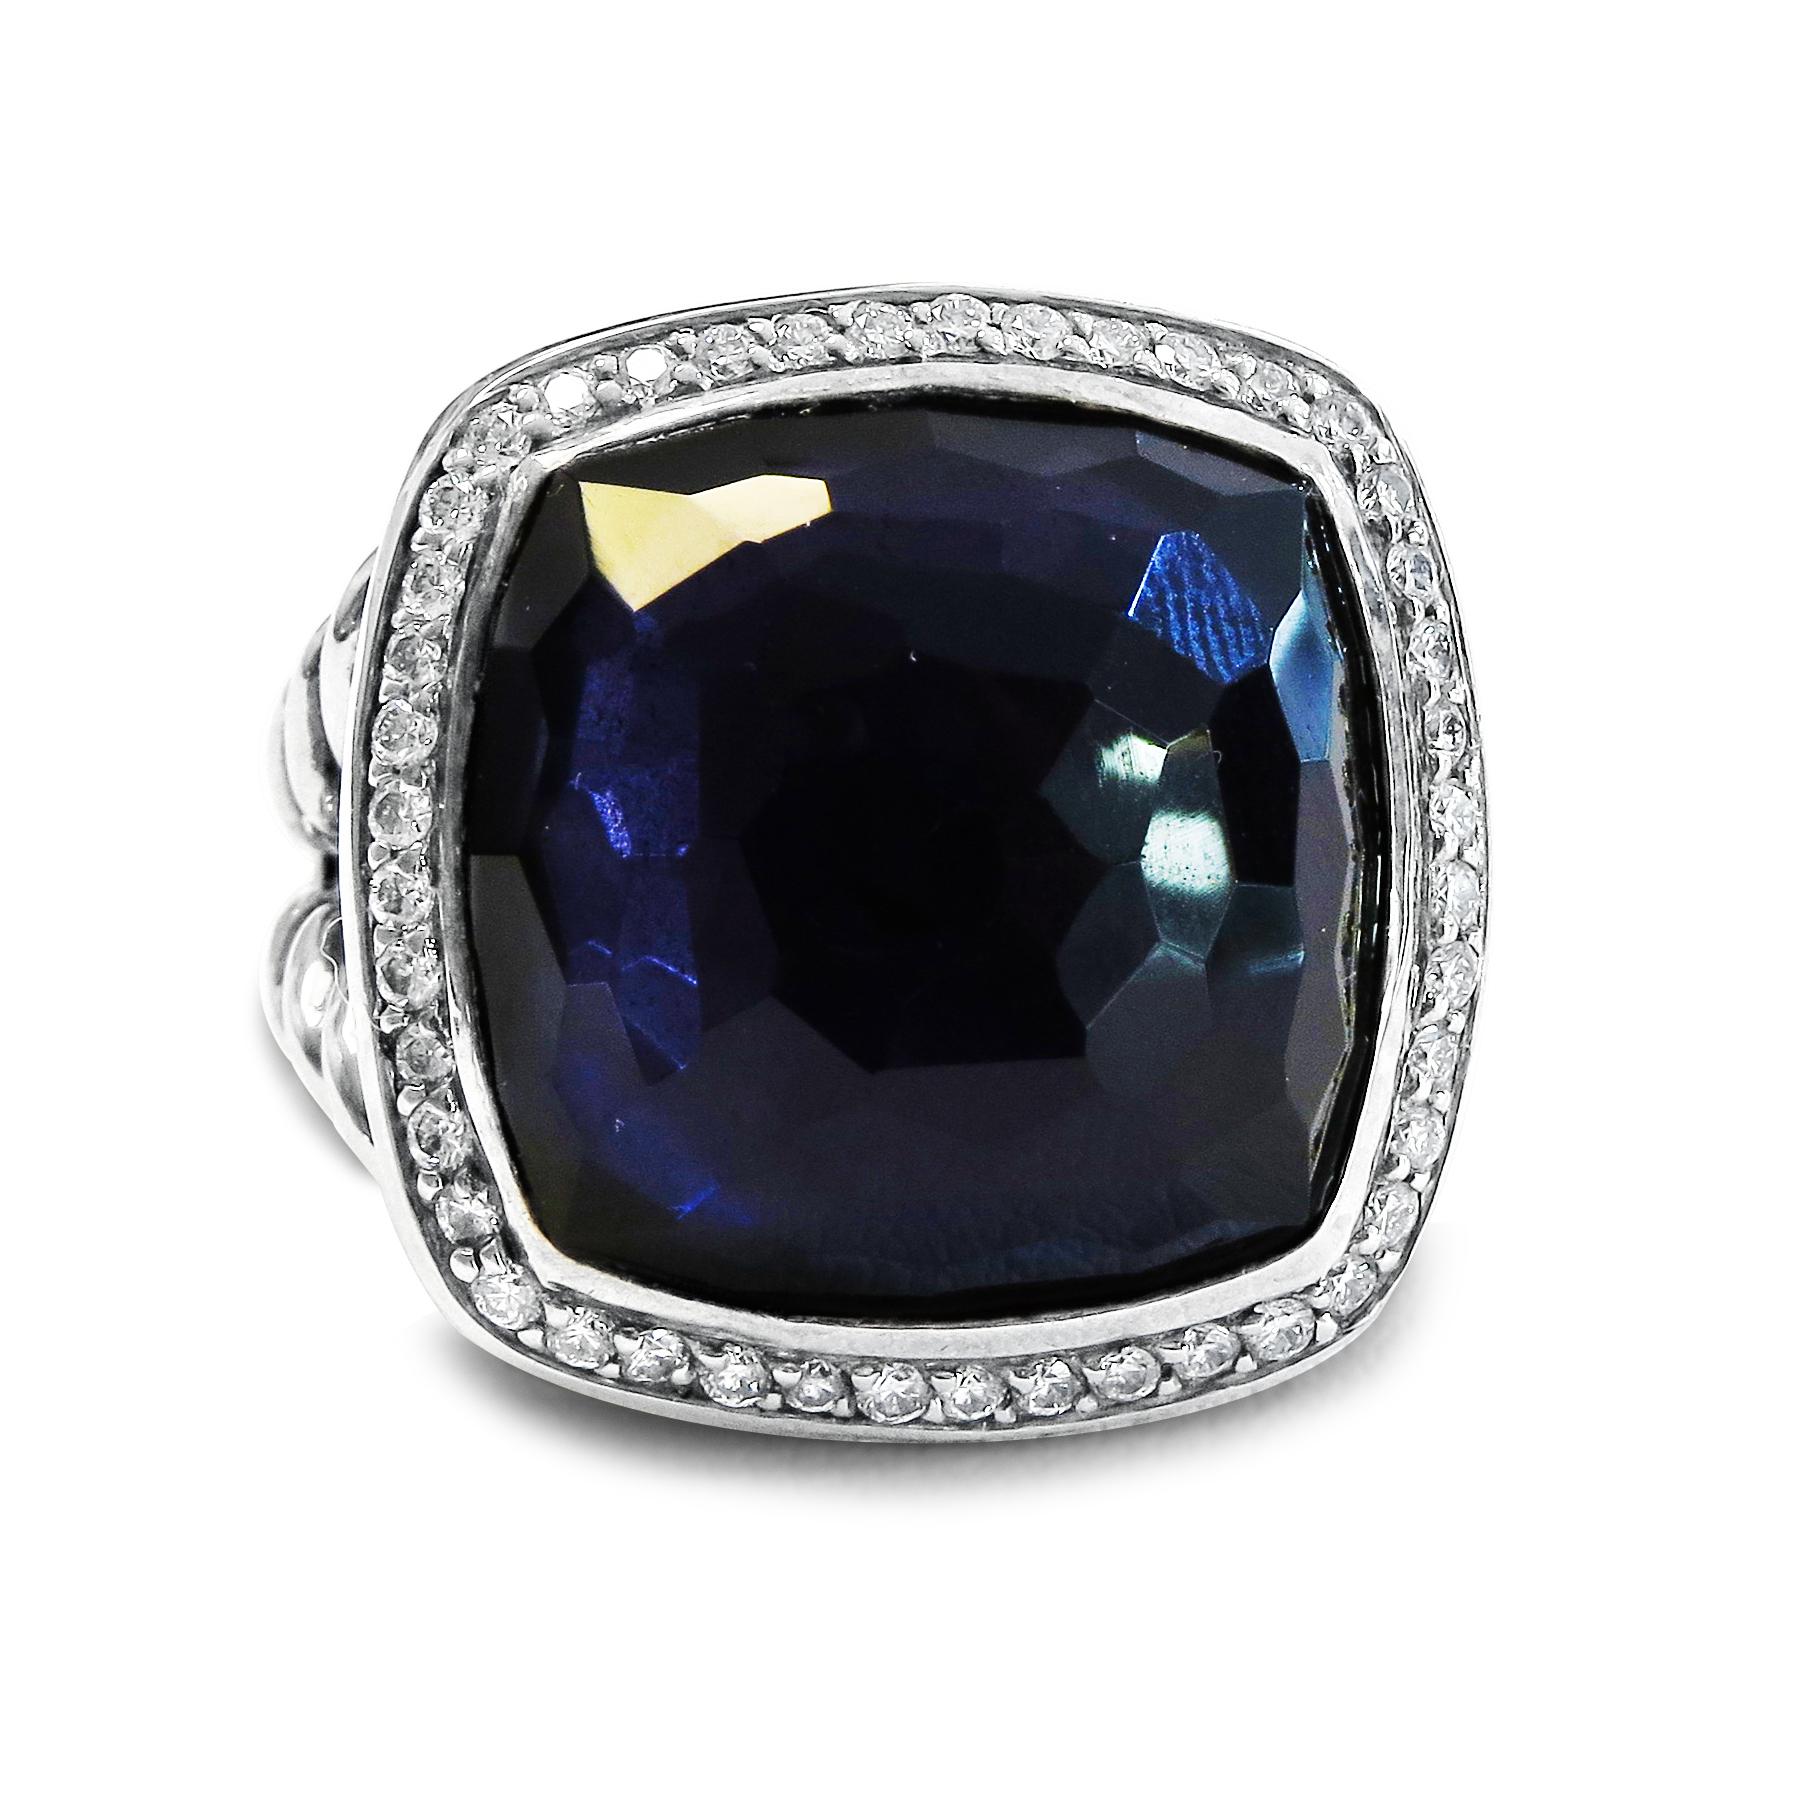 This classic and modern David Yurman ring features a princess-cut 17mm by 17mm  faceted amethyst and 0.42-carat pave diamonds that accents around it. It is further accented by a sterling silver shank design. It weighs 17.7 grams, 21mm wide and the